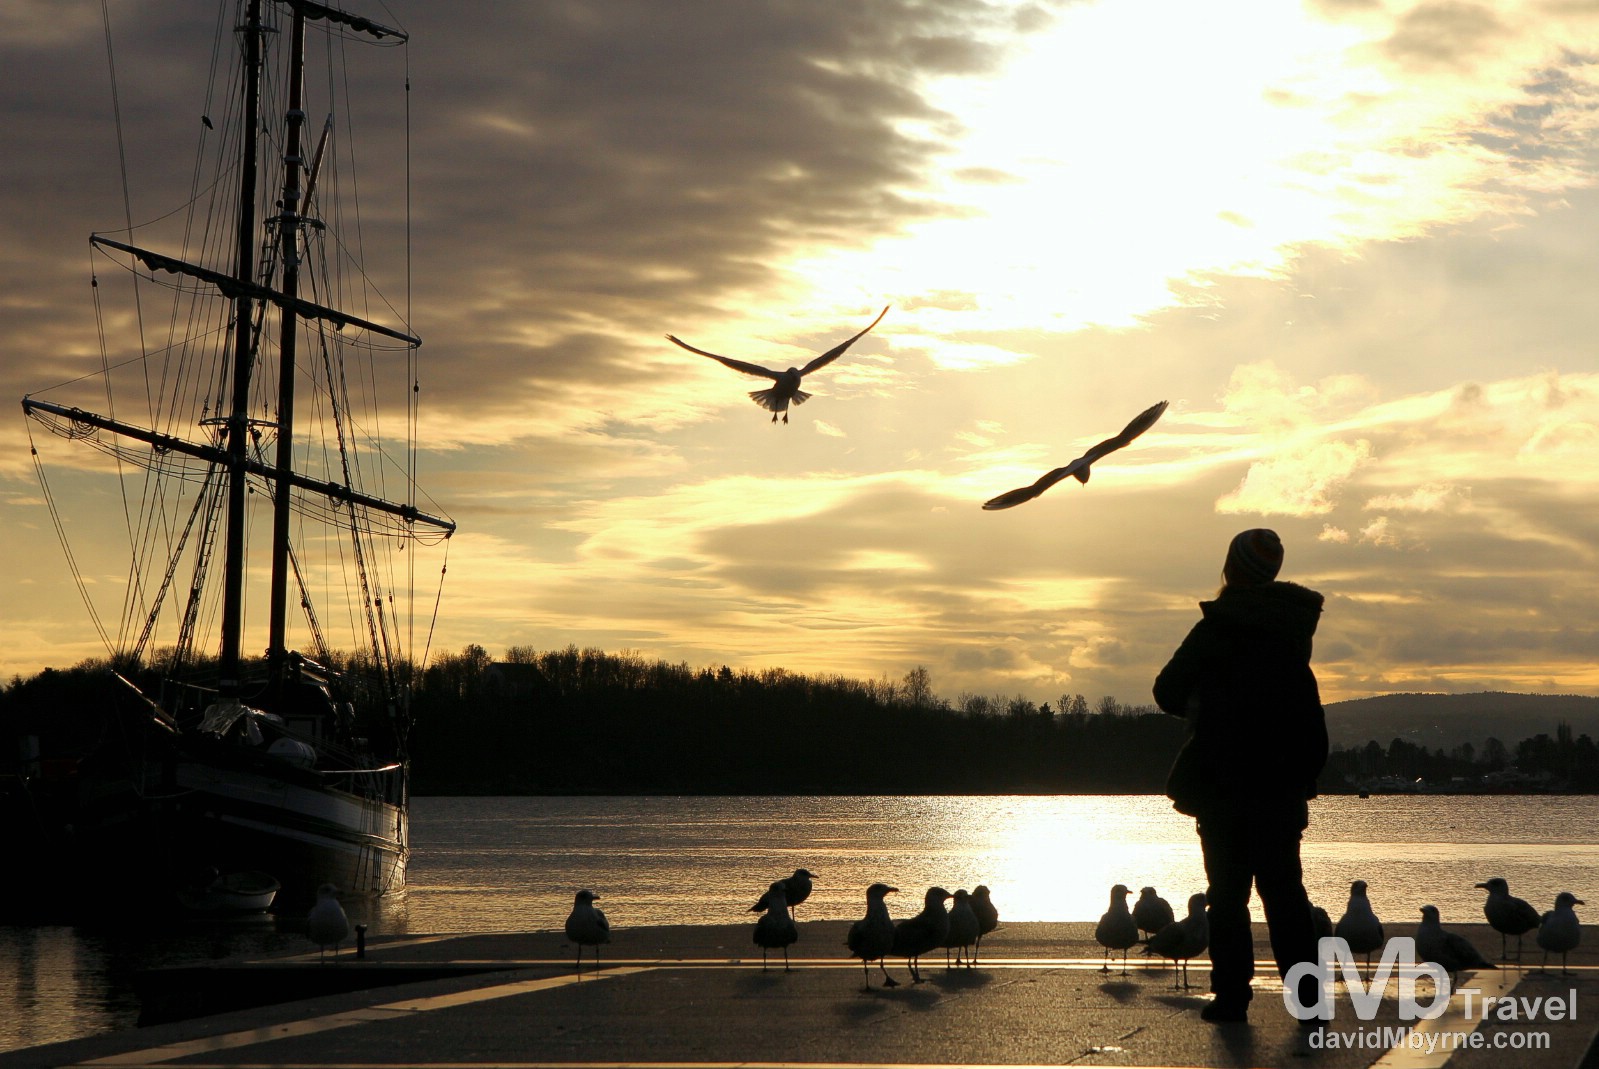 Sunset silhouettes & shadows by the waterfront in Oslo, Norway. November 29th 2012.